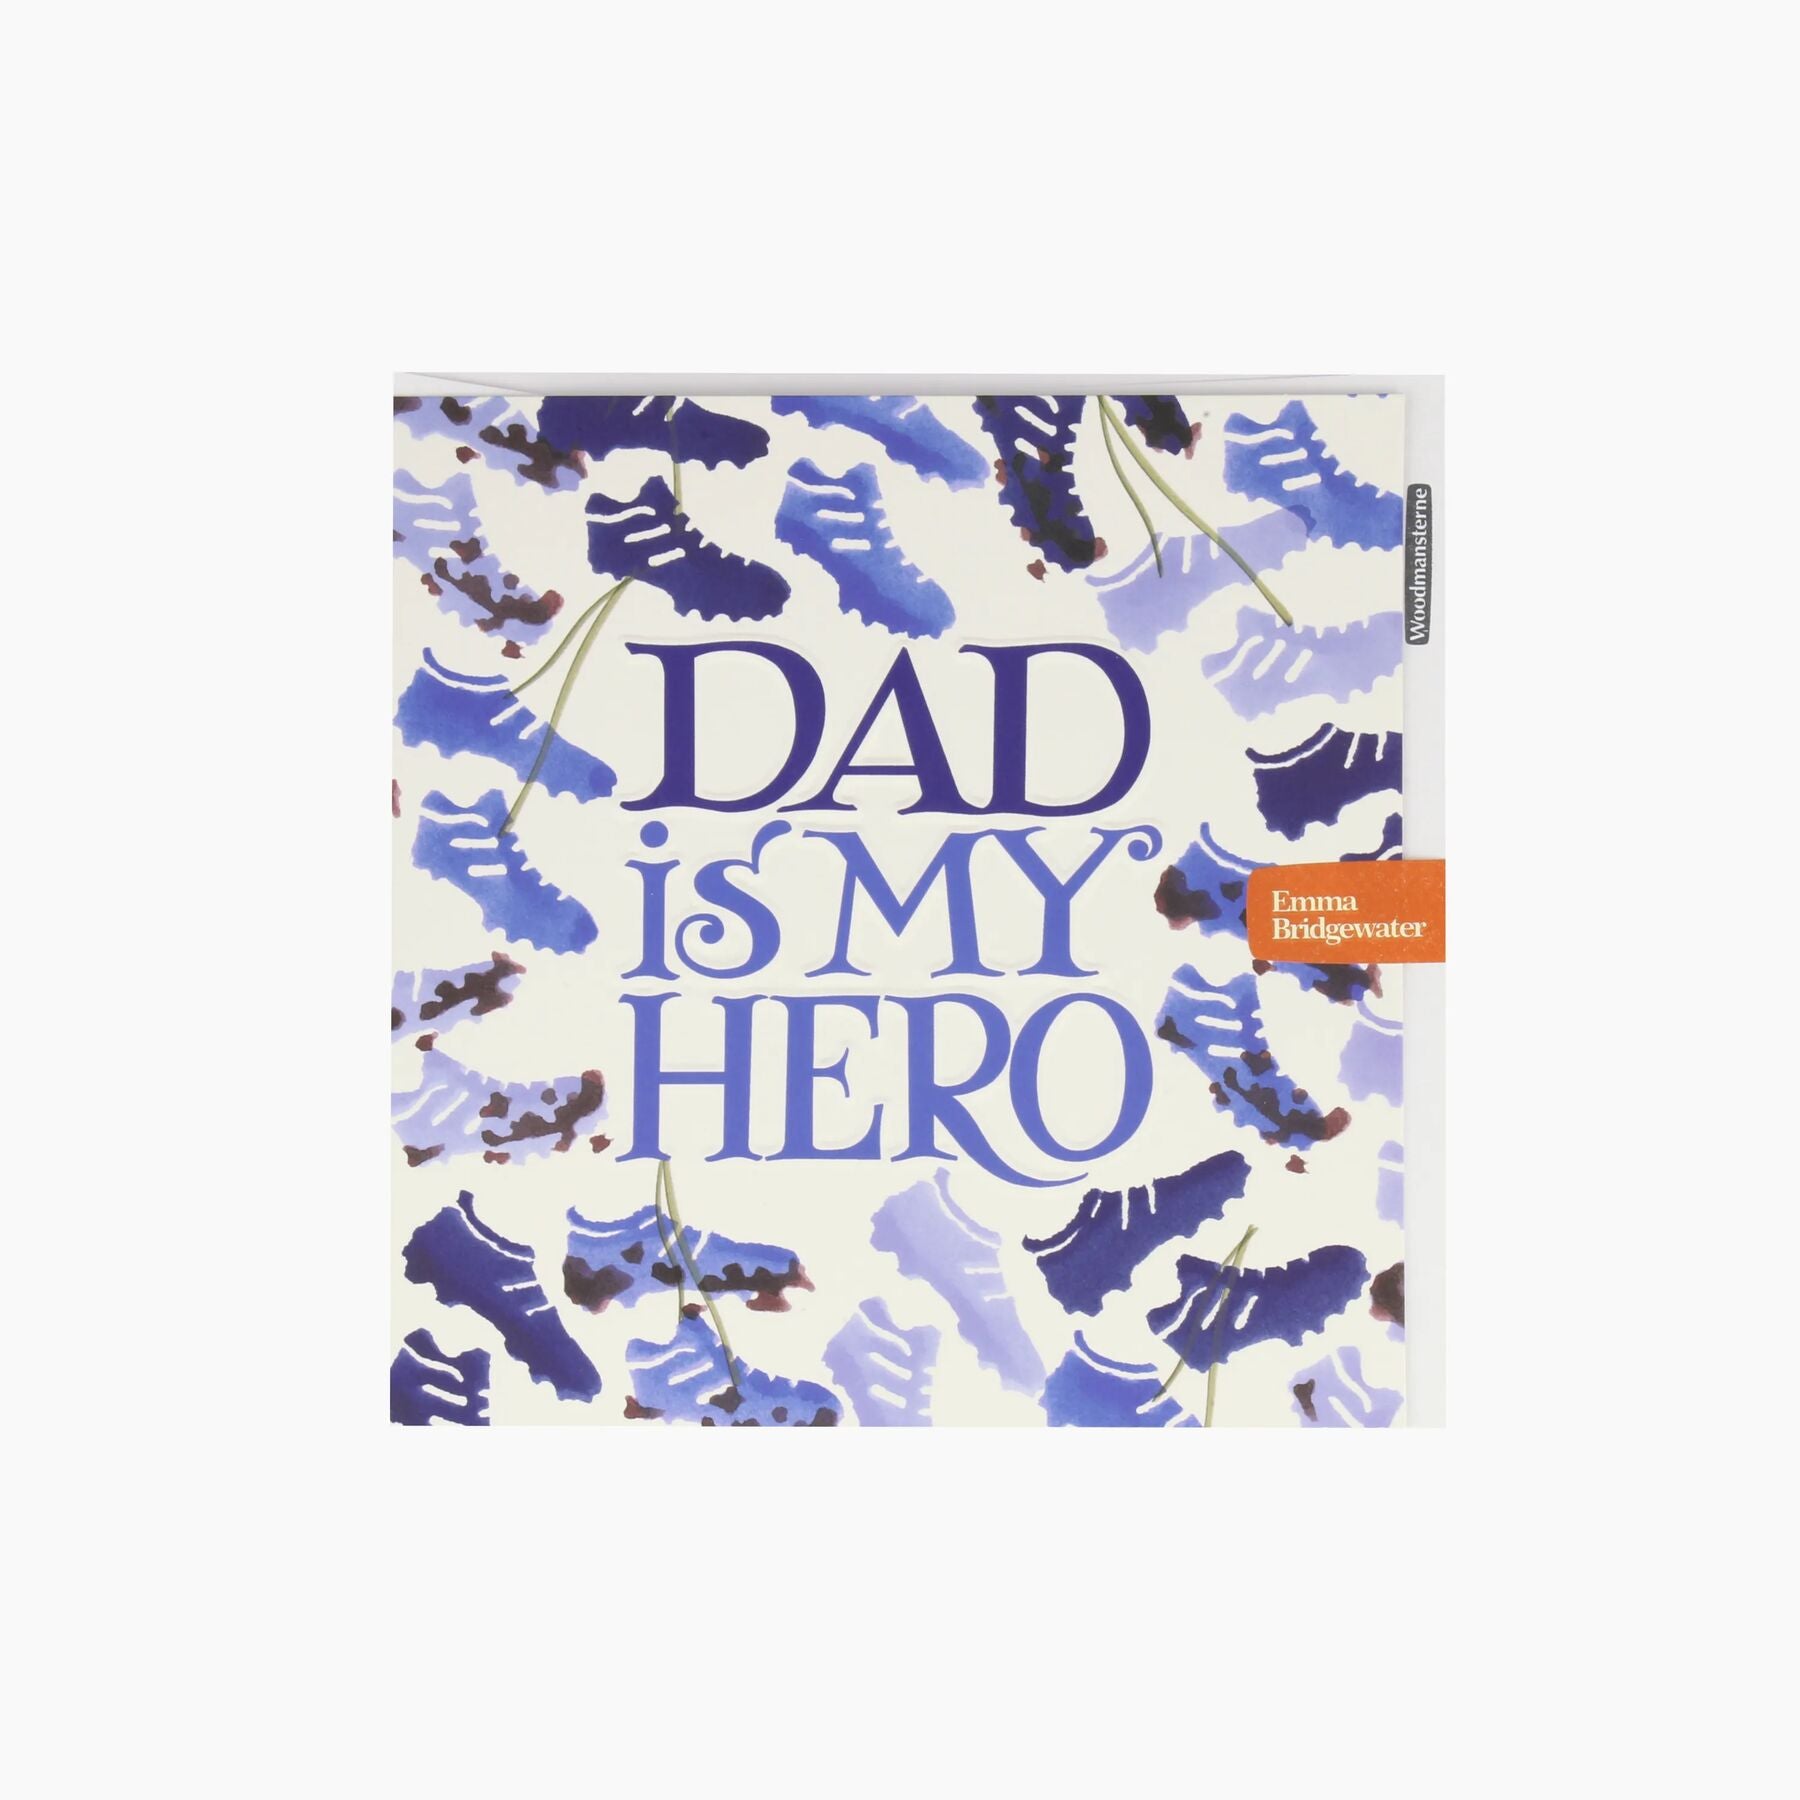 Dad Is My Hero Muddy Boots Father's Day Card  | Emma Bridgewater